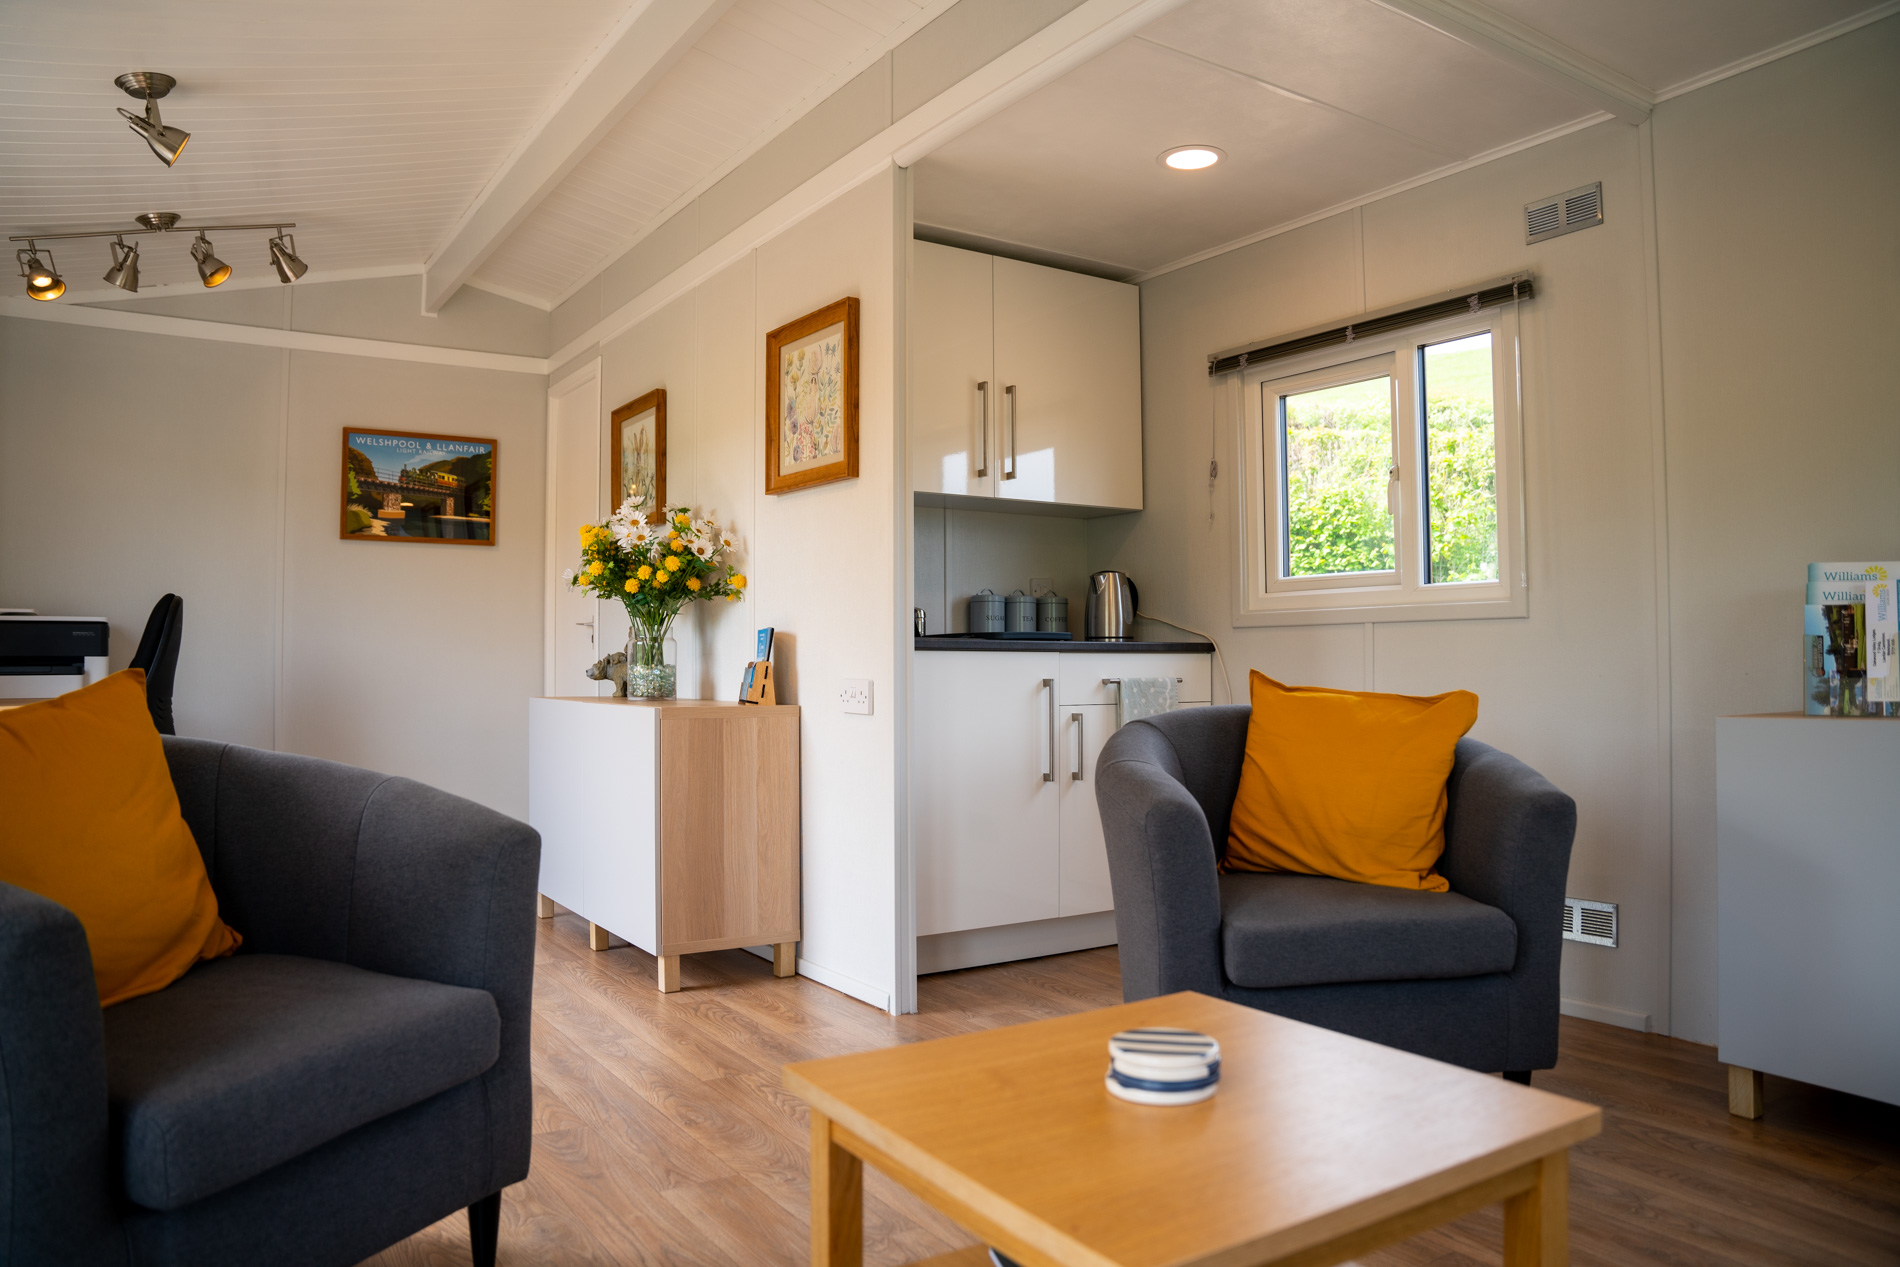 Our Facilities | Oakwood Valley Lodges